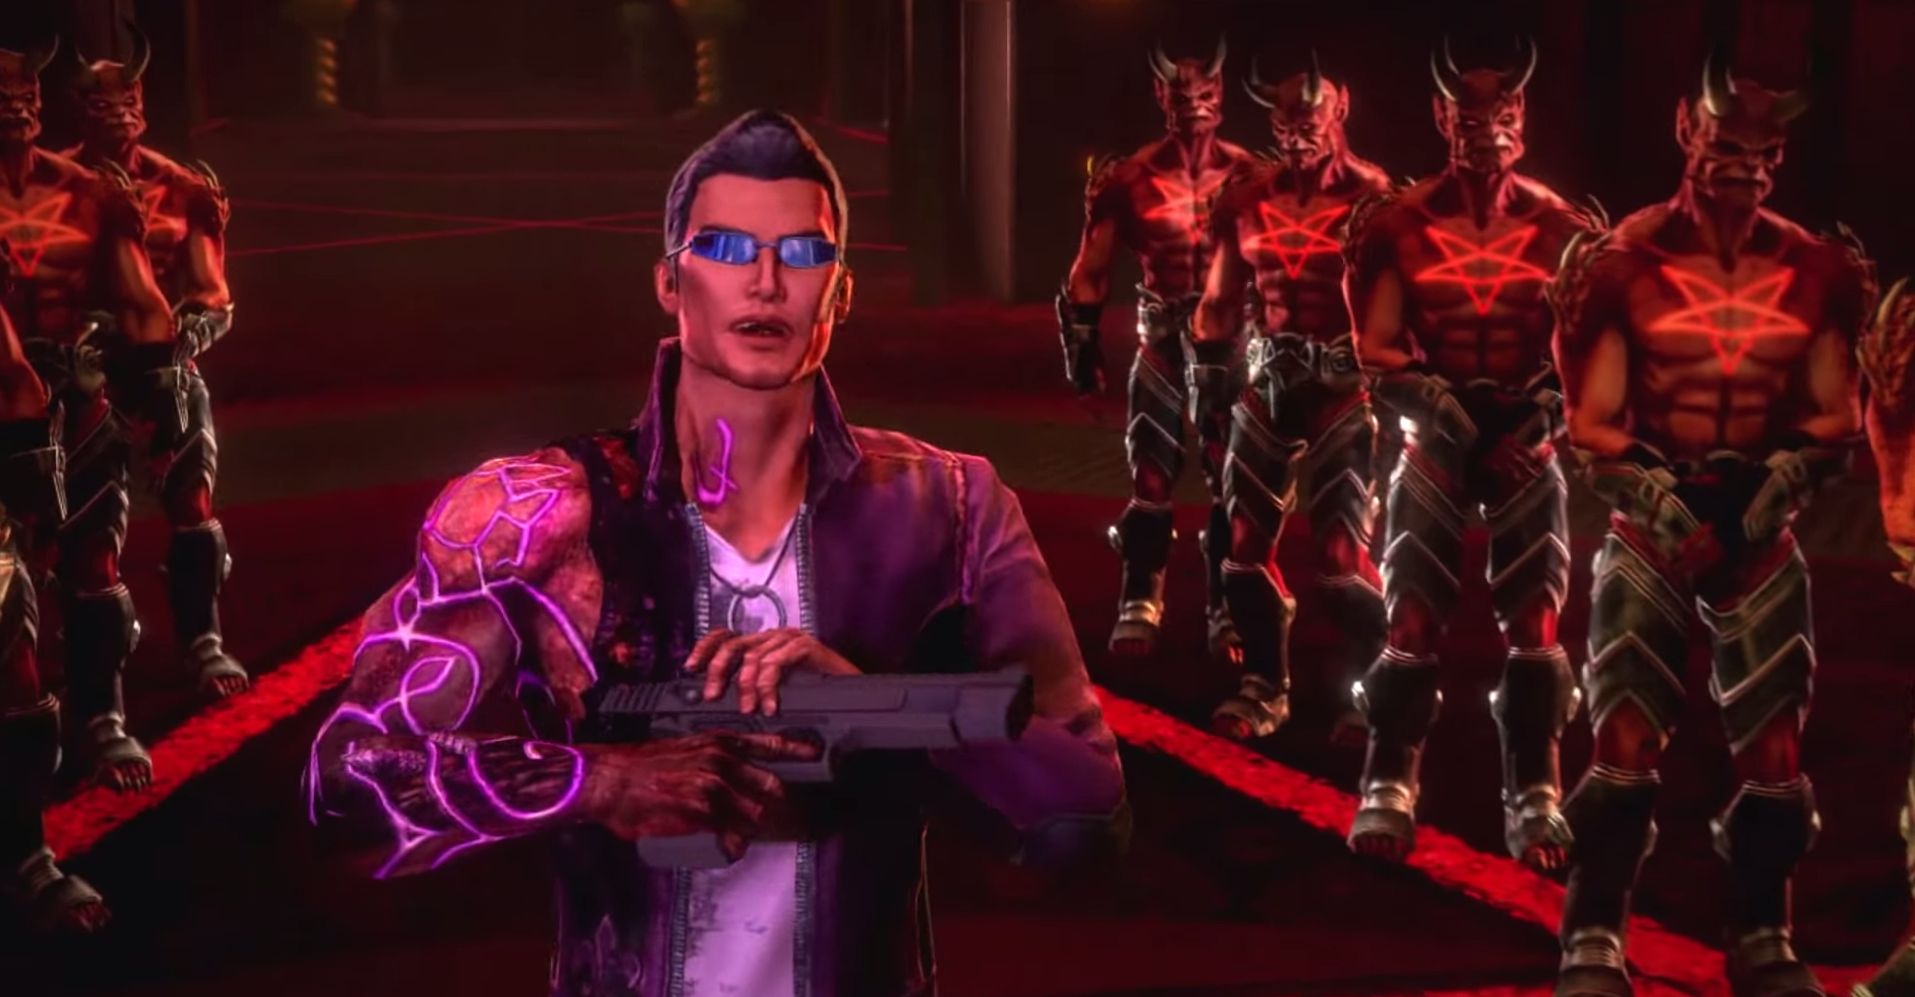 Saints Row: Gat Out of Hell (2015) - MobyGames